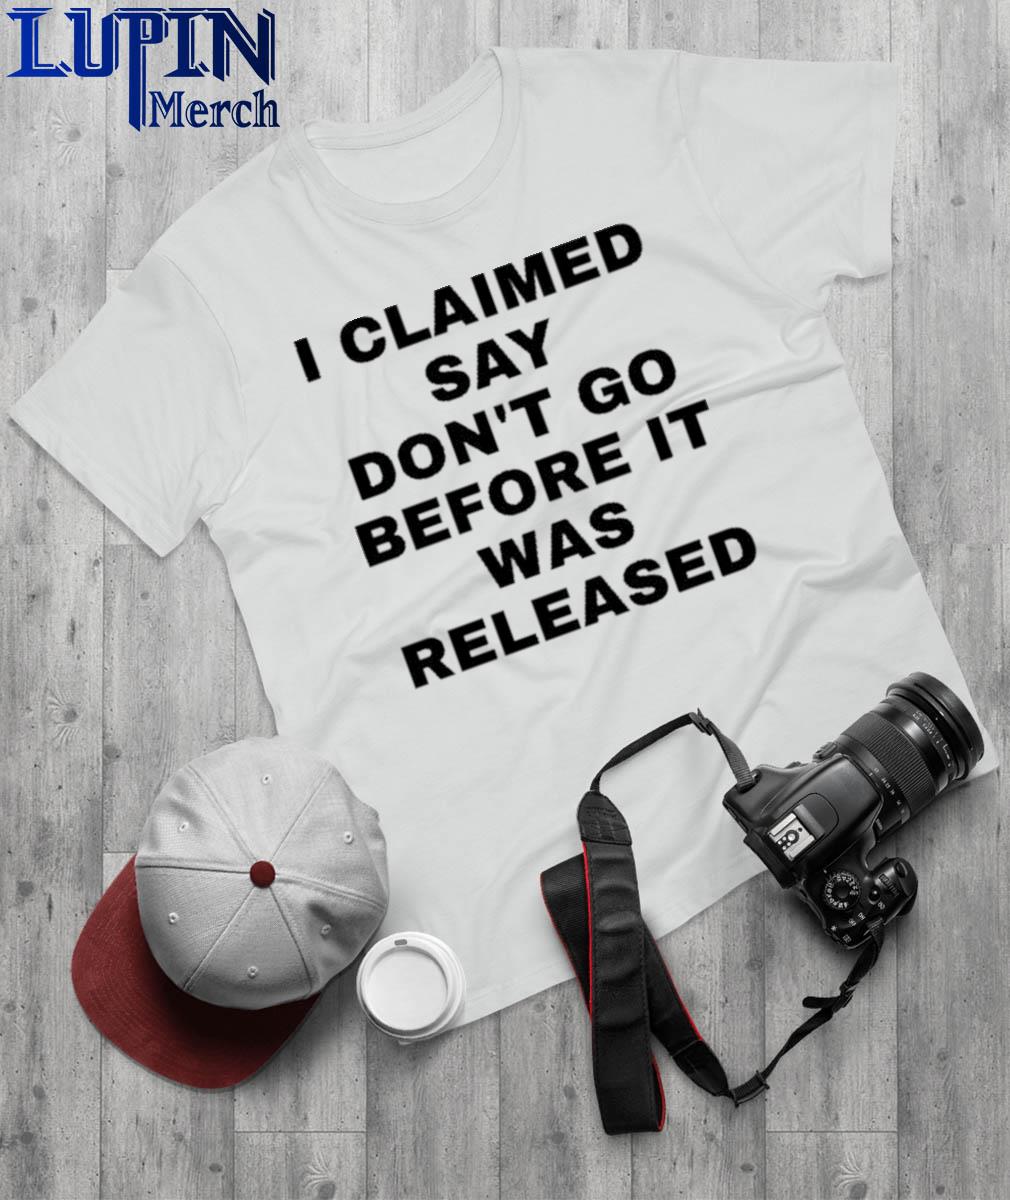 Official cemo I Claimed Say Don't Go Before It Was Released Shirt